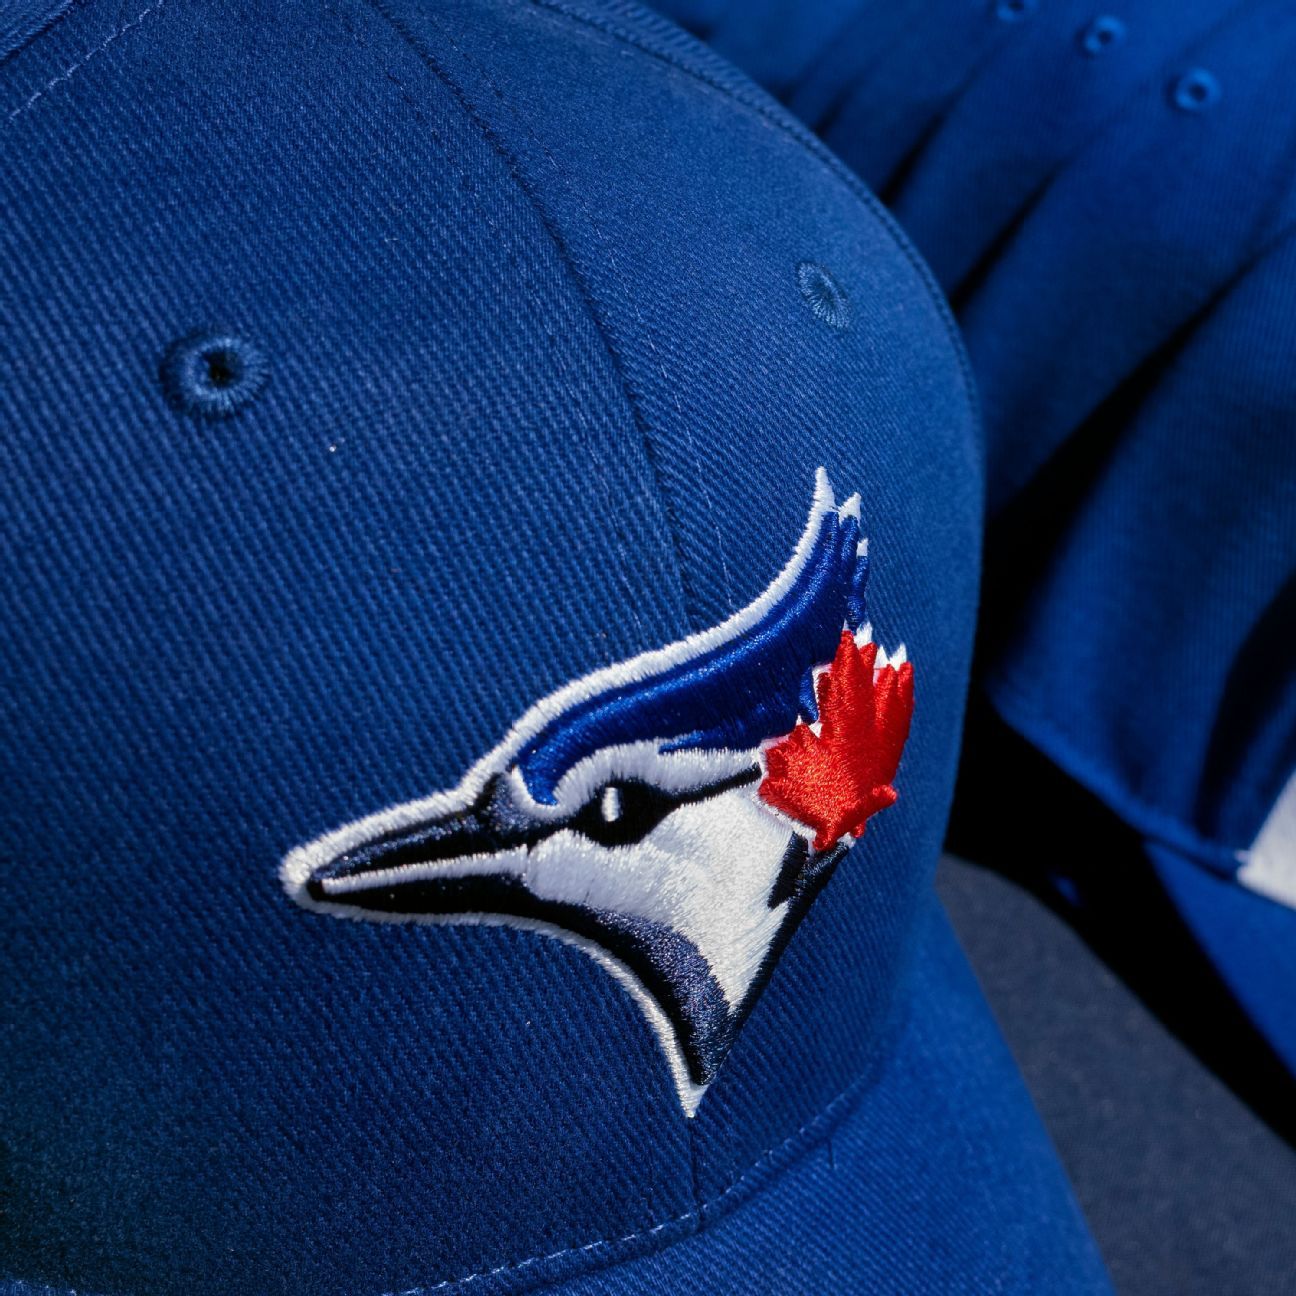 Blue Jays uncertain of 2021 home after COVID-19 forced them to play 2020  season in Buffalo